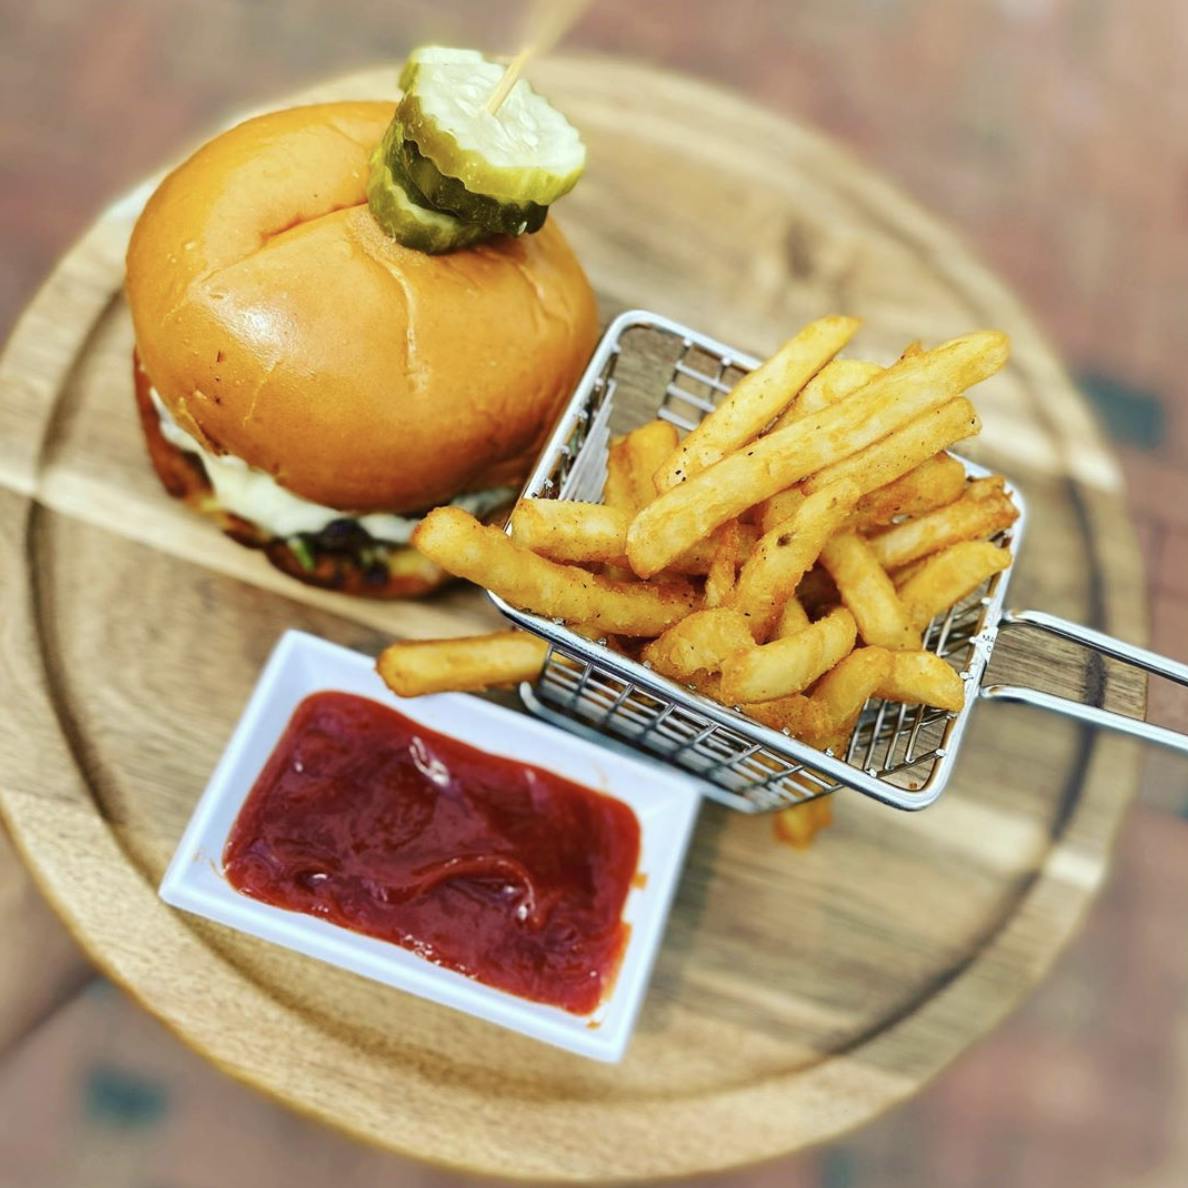 Image of a B-Unos burger, fries, and a side of ketchup